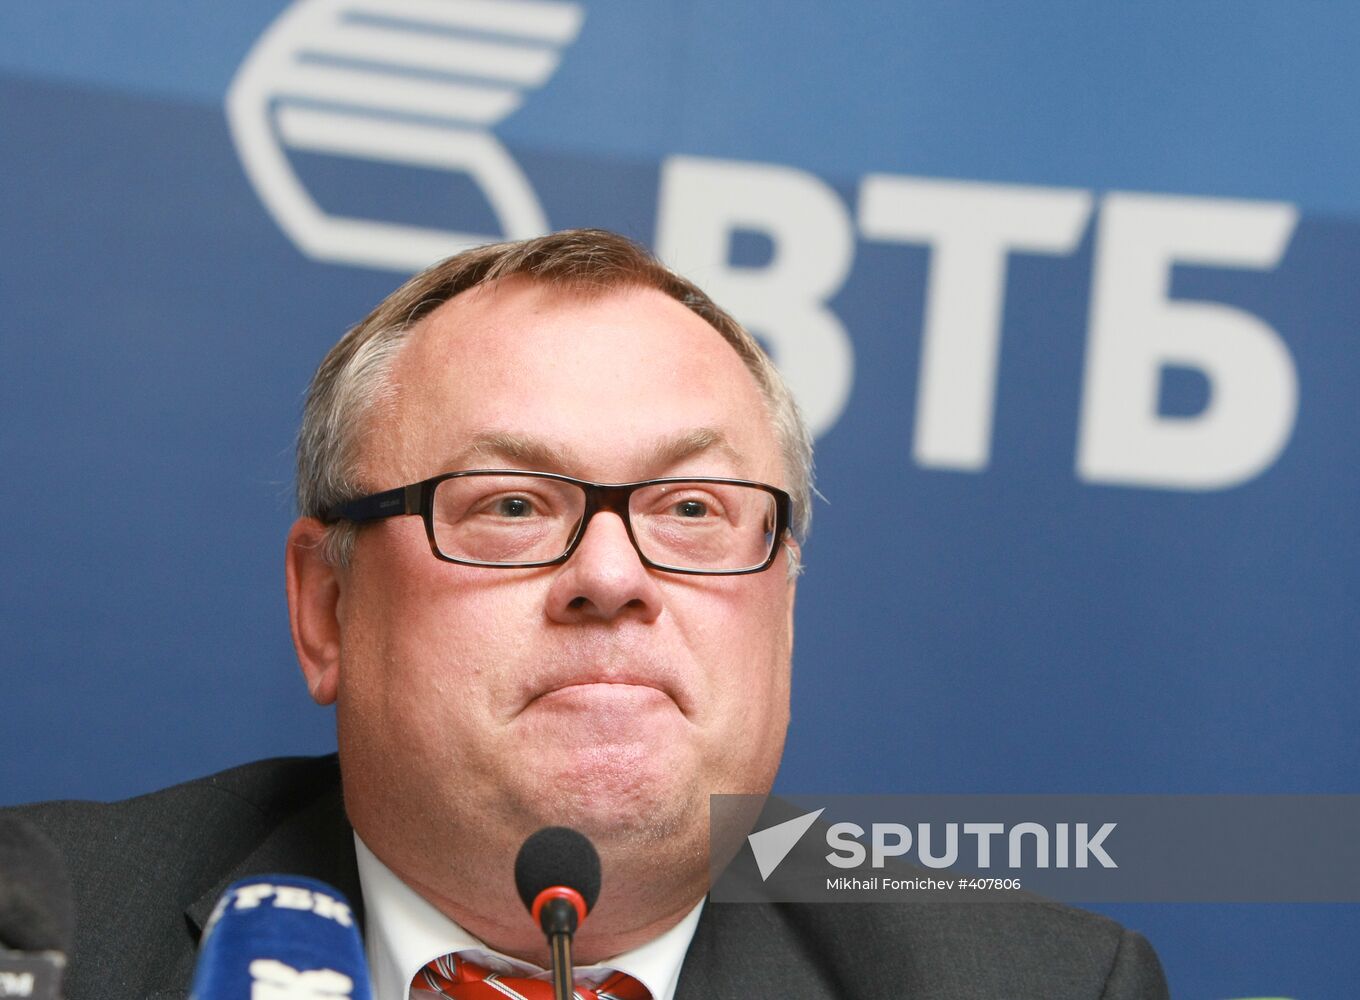 News conference on results of VTB bank annual meeting